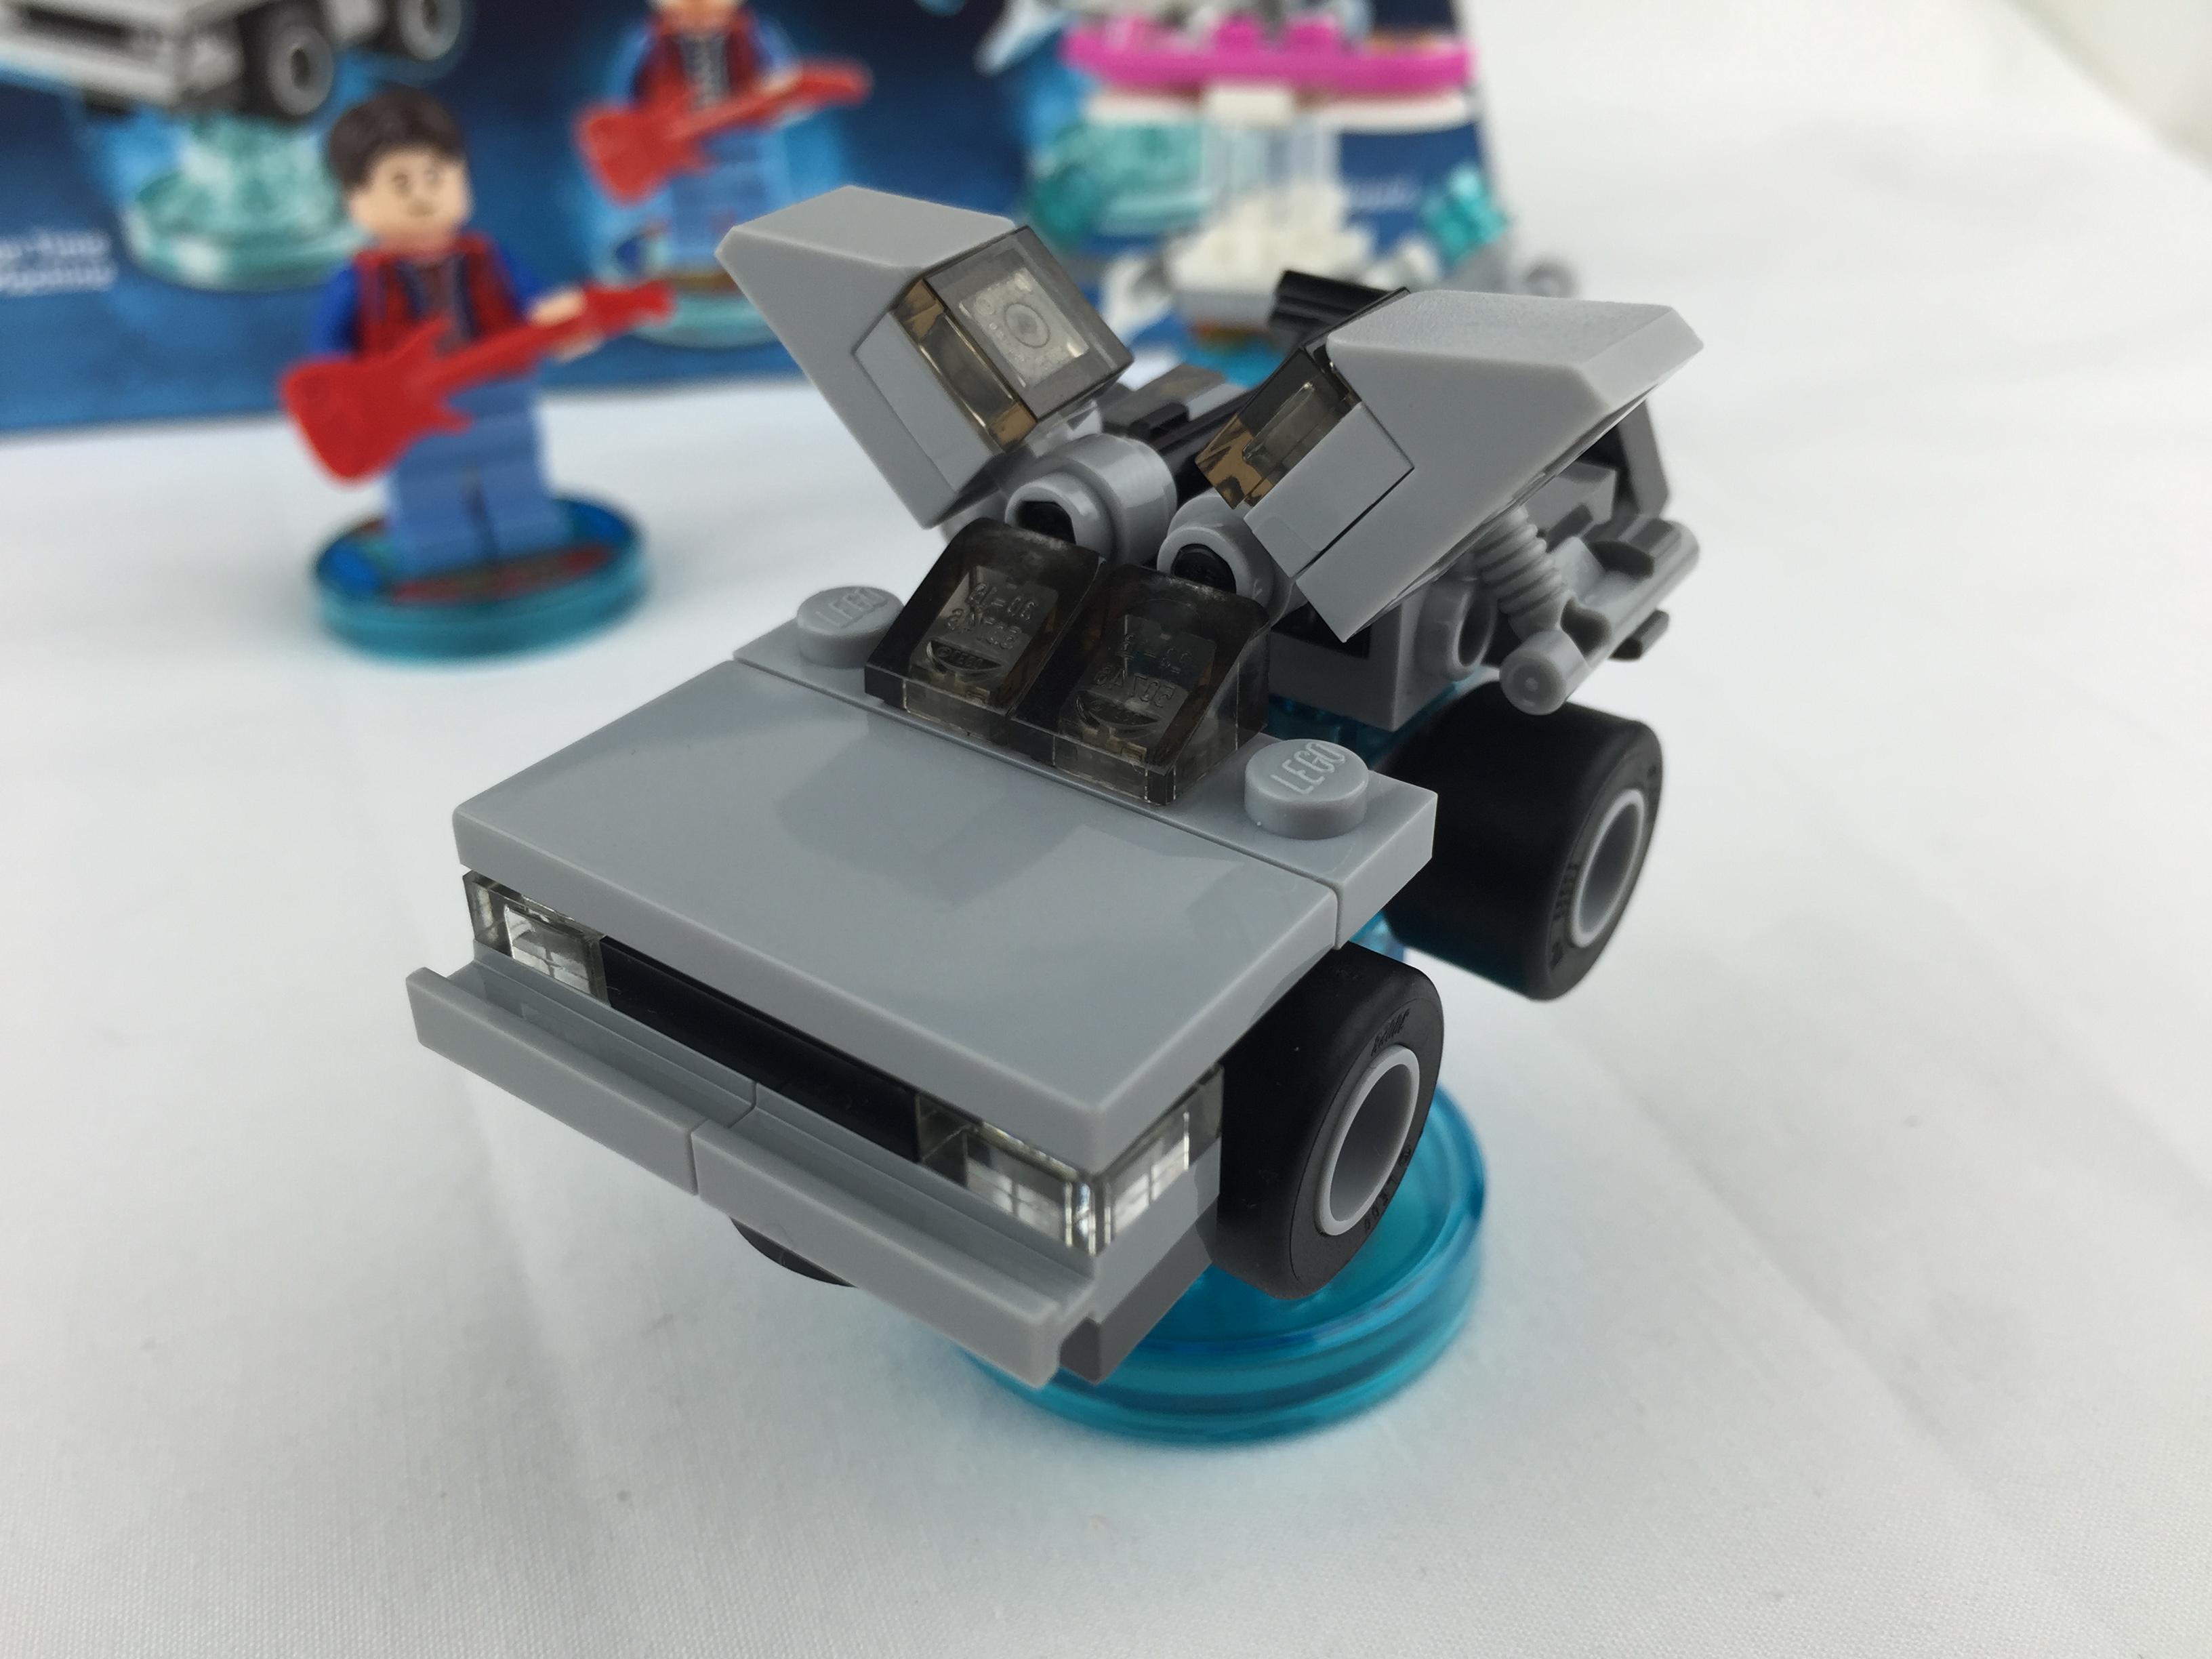 lego dimensions back to the future car instructions